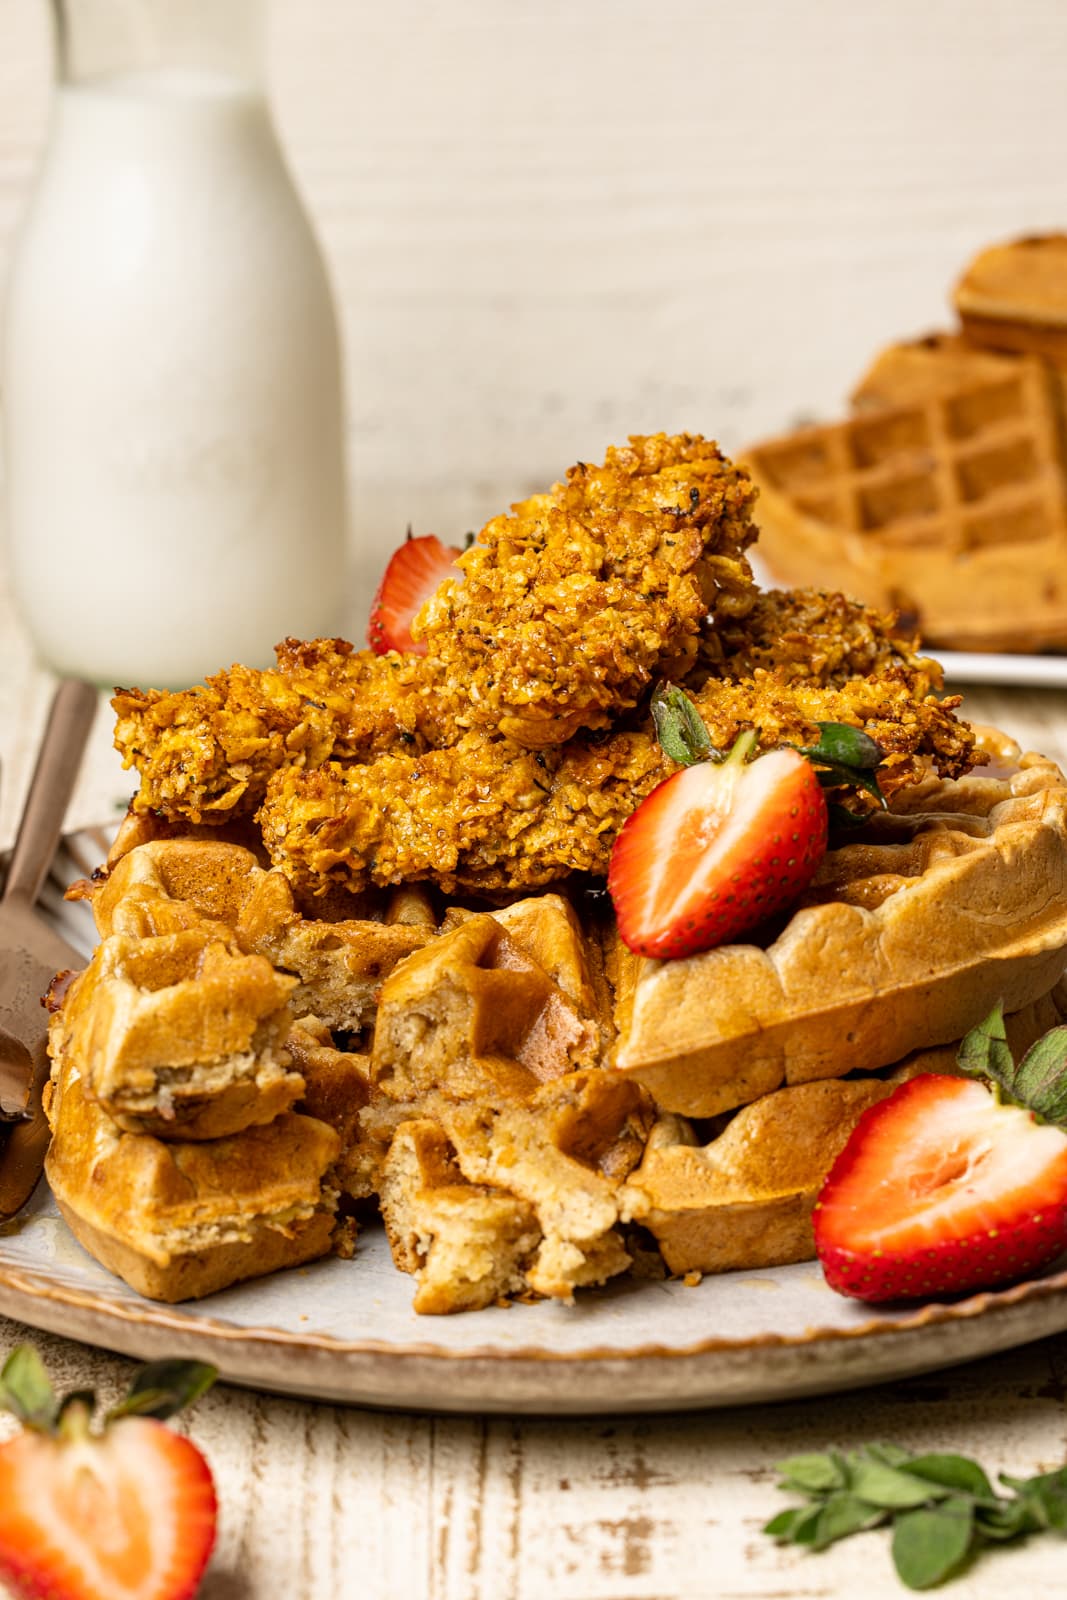 Chicken and waffles on a white plate on a white wood table with a glass of milk and strawberries.